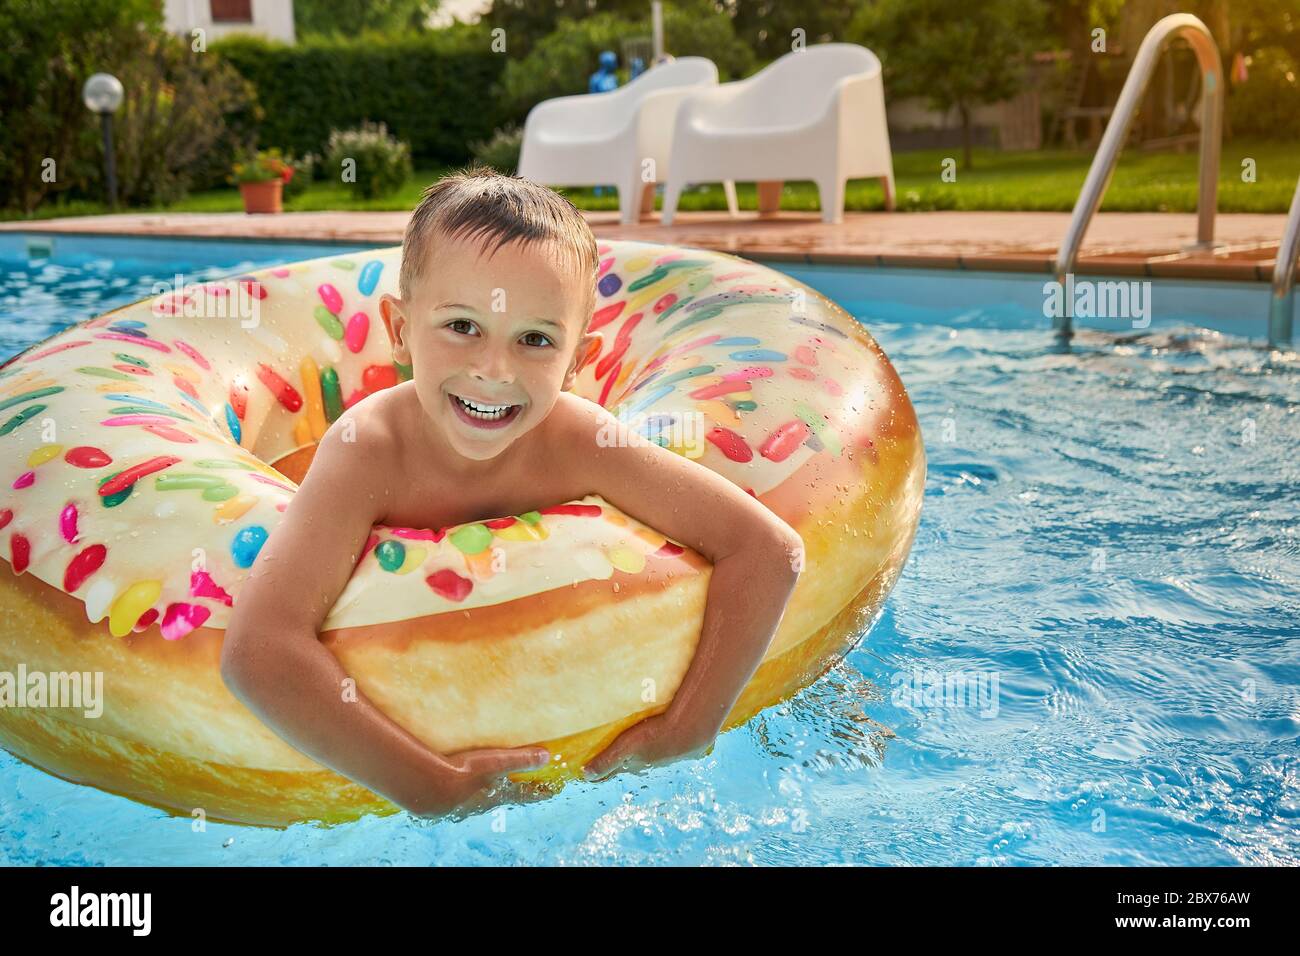 5 years old Boy in swimming pool smiling on inflatable colorful ring , warm summer day on vacation Stock Photo